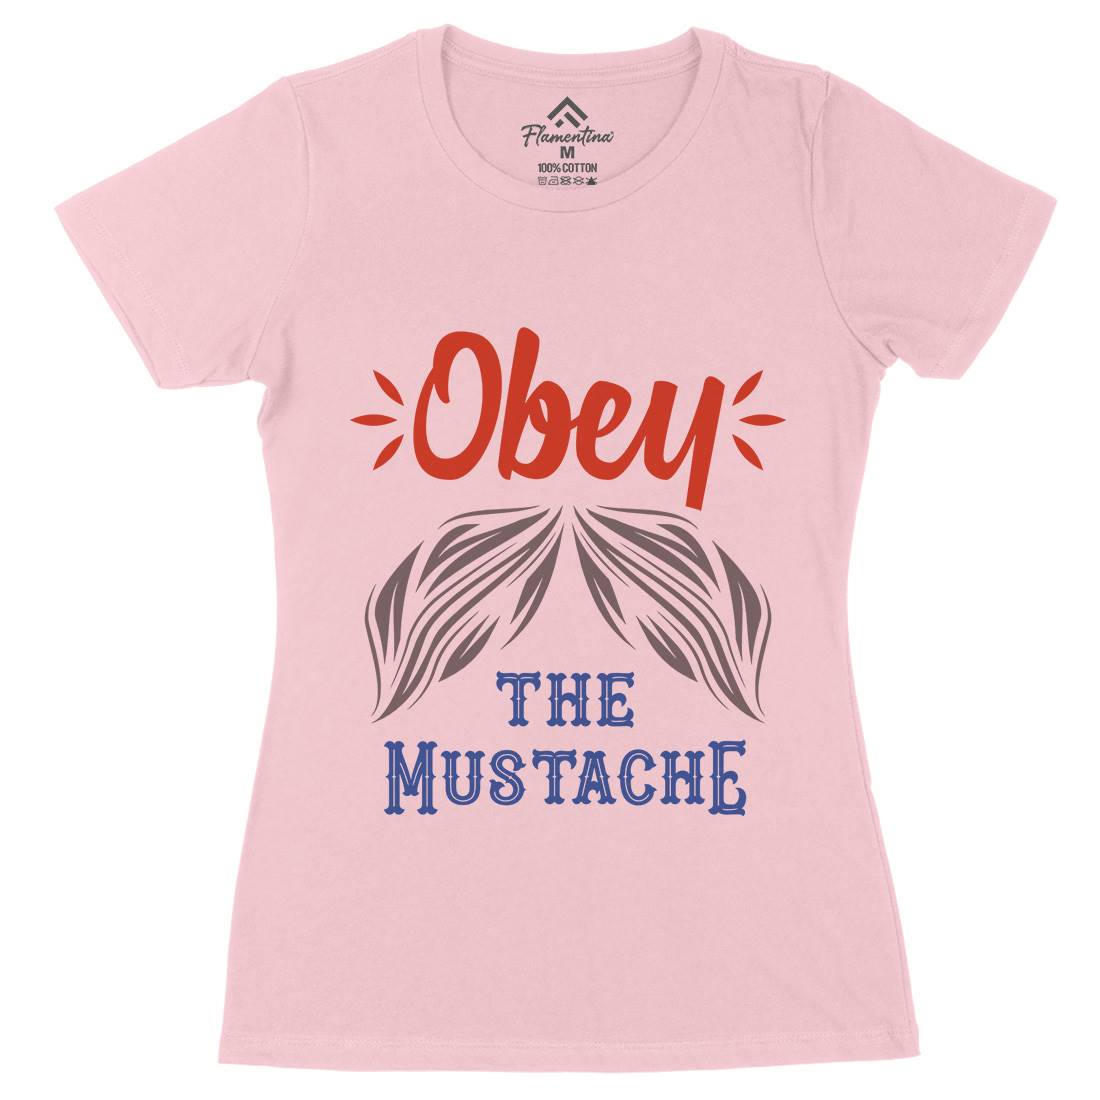 Obey The Moustache Womens Organic Crew Neck T-Shirt Barber C802